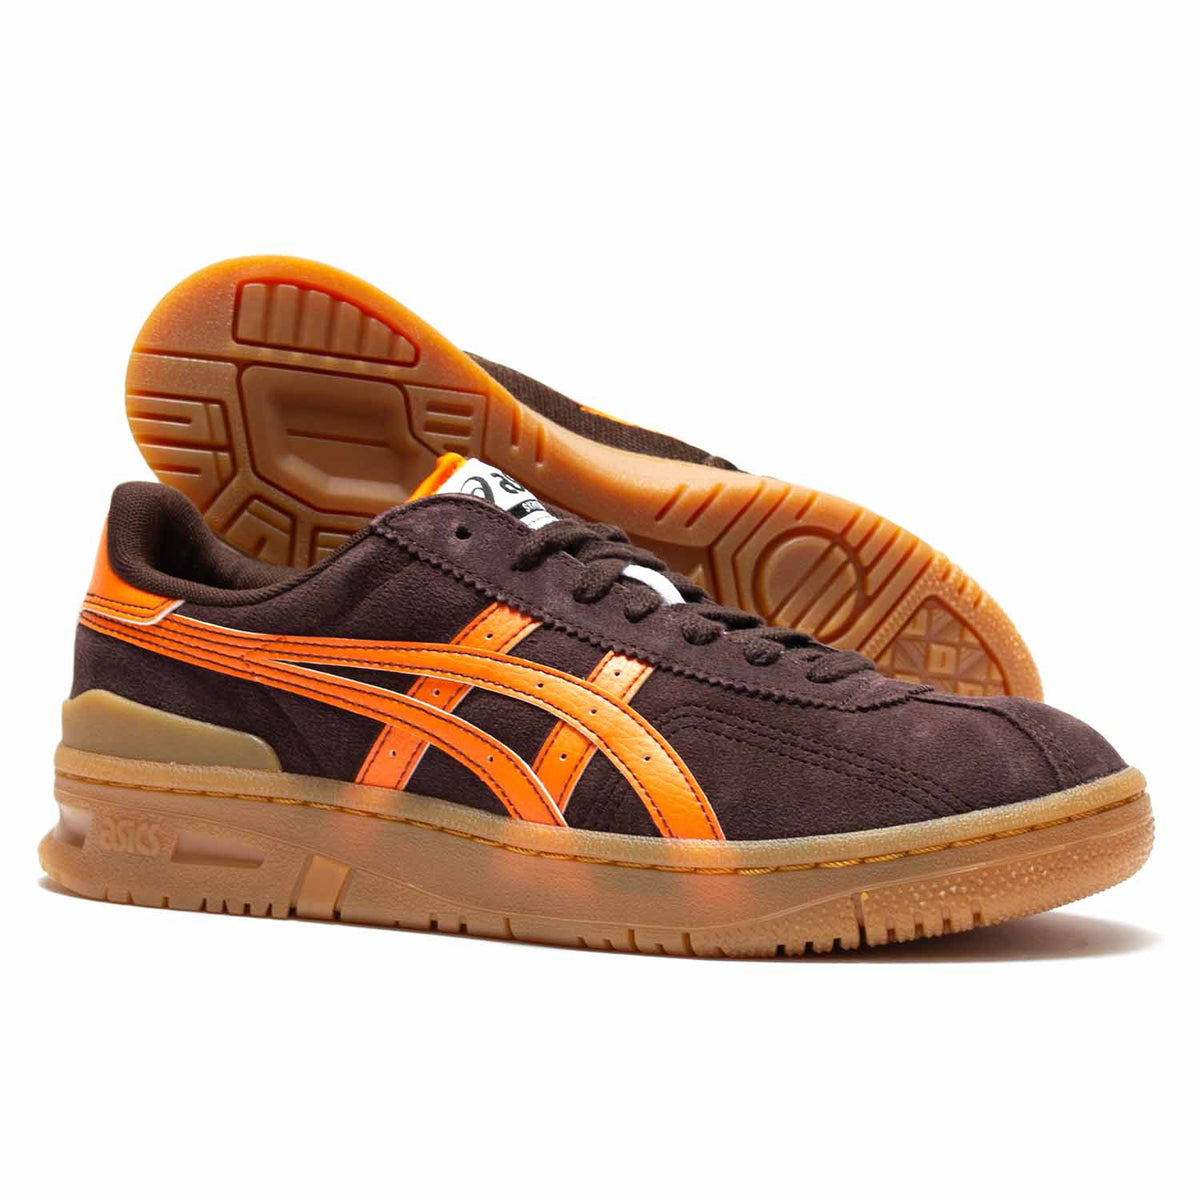 Asics Vic NBD in coffee colored brown suede. Orange leather accents on heel, and side. Orange leather Asics logo. Orange piping on white puffy tongue. Light brown slightly translucent sole.